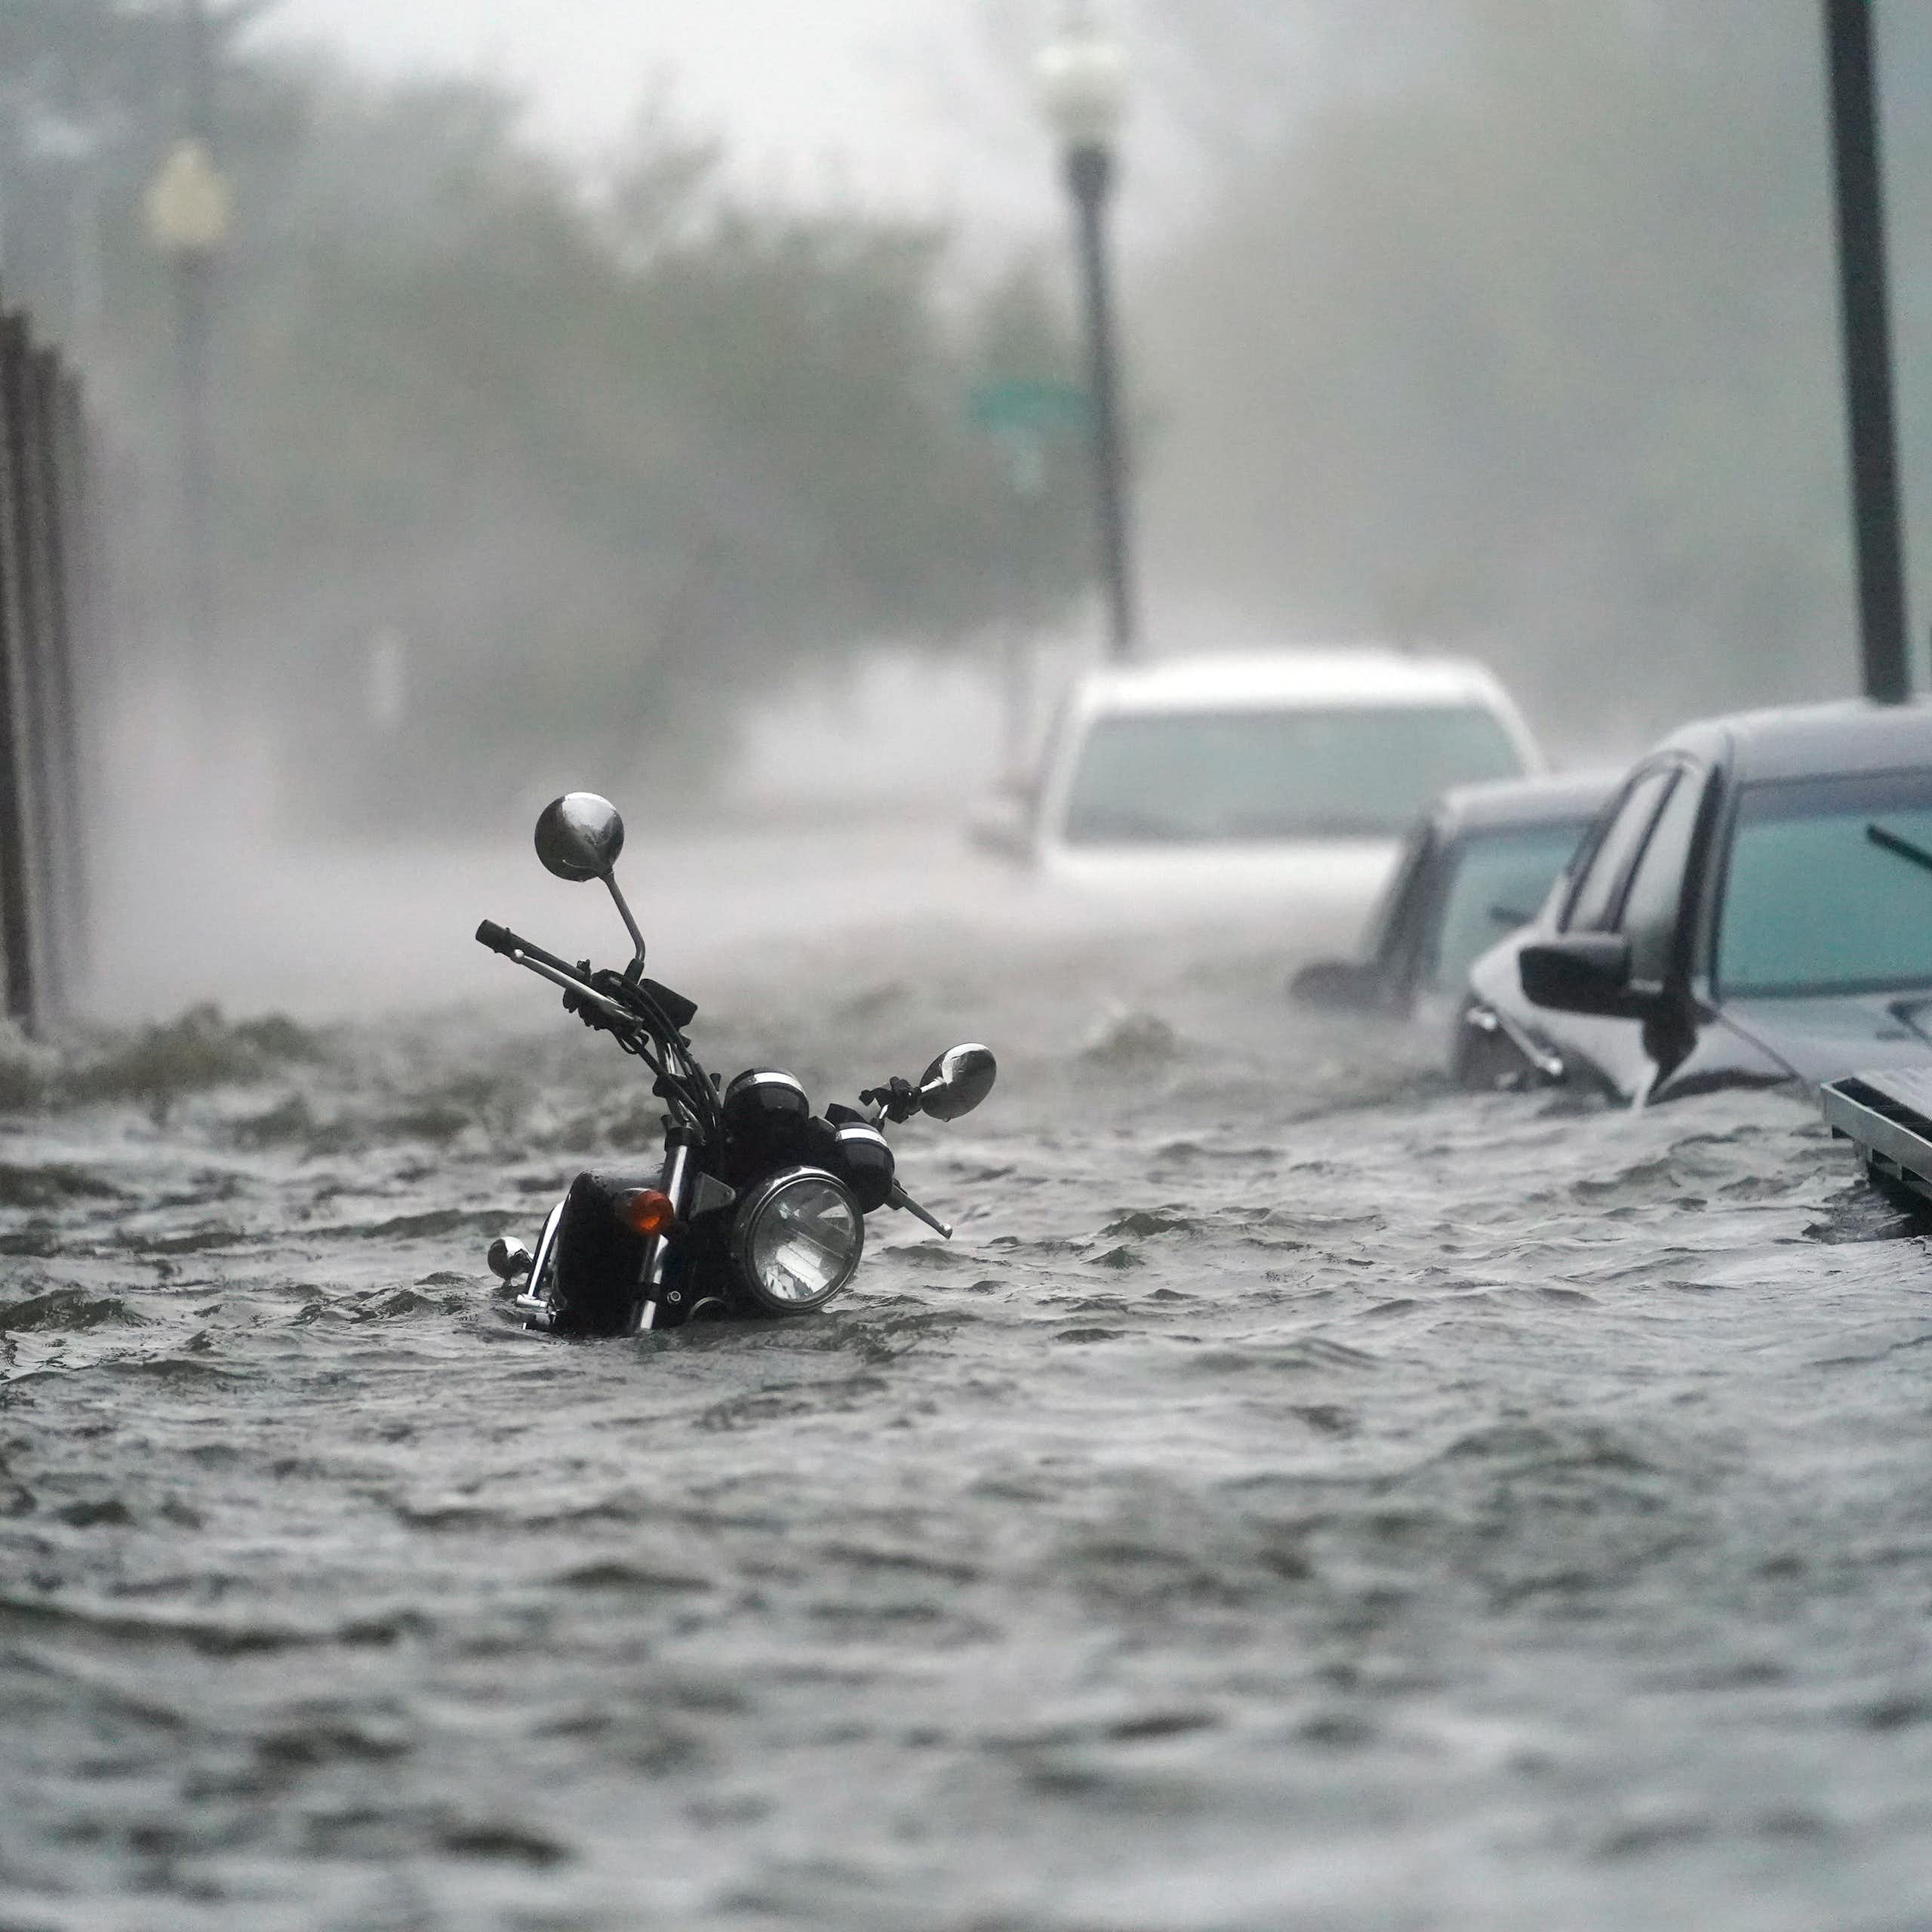 A flooded street during a hurricane with water up to the handle bars on a motorcycle and over the doors on cars parked along a street in Pensacola in 2020.